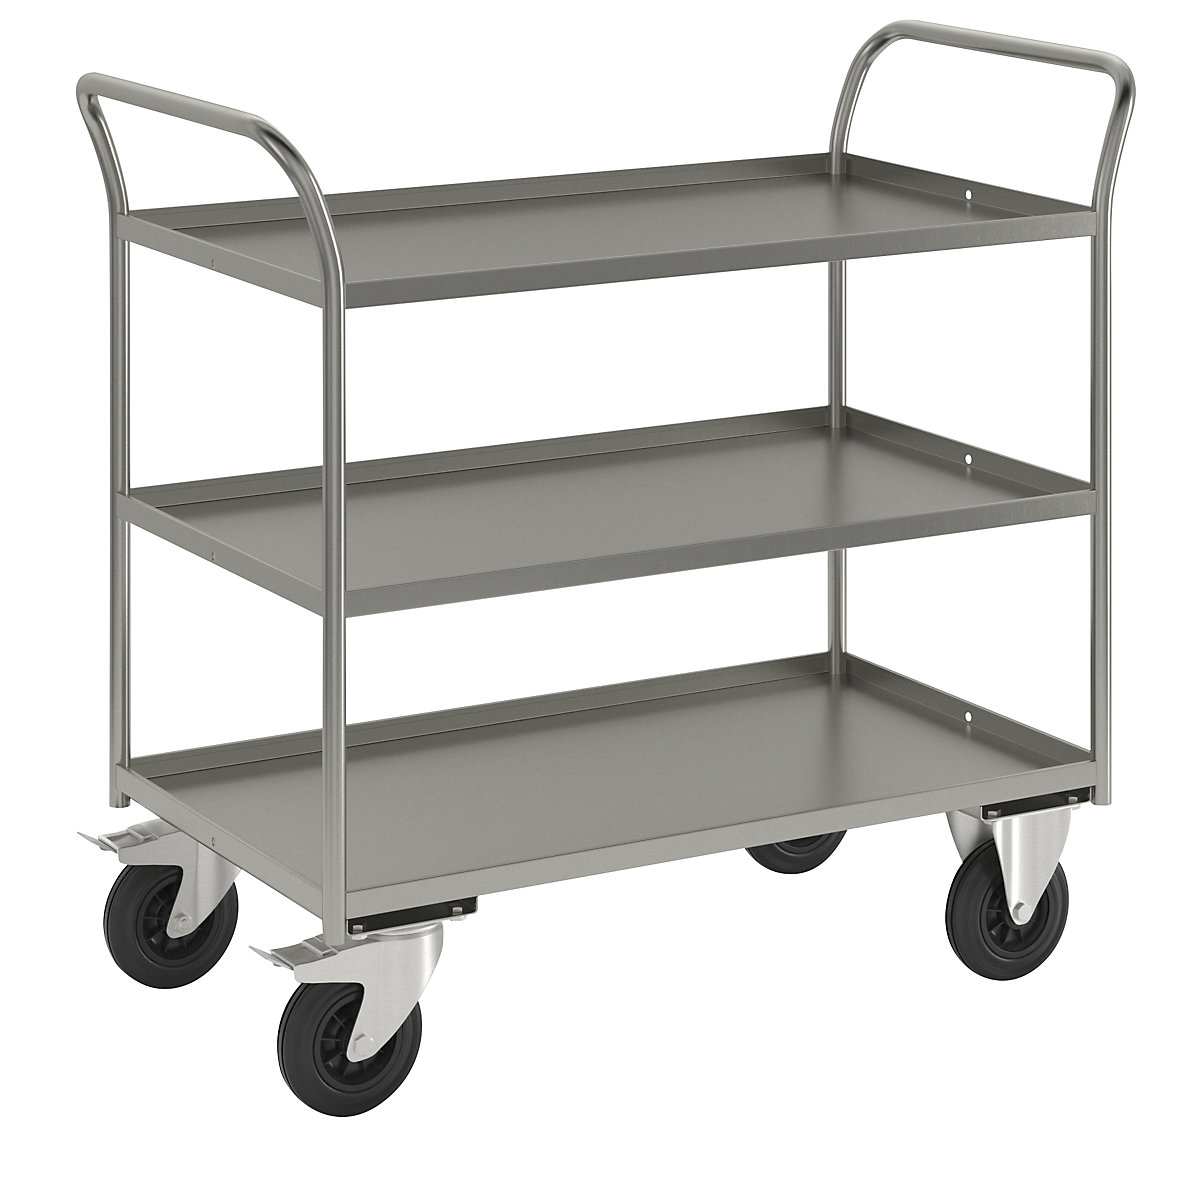 KM41 table trolley – Kongamek, 3 shelves with raised edges, LxWxH 1070 x 550 x 1000 mm, zinc plated, 2 swivel castors with stops, 2 fixed castors-8